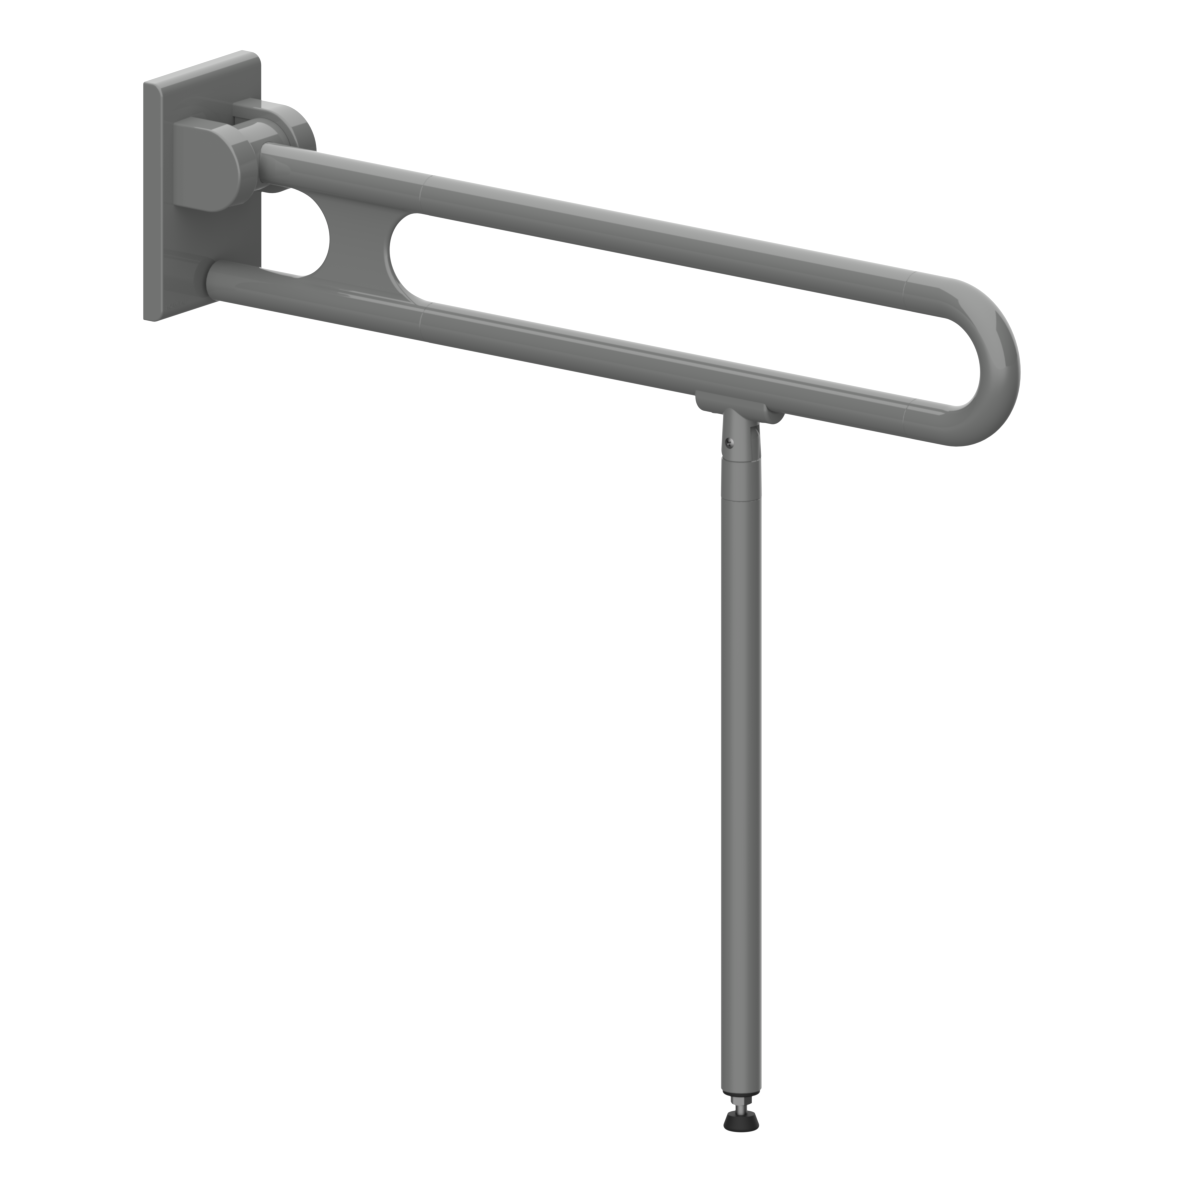 Nylon Care 300 Lift-up support rail, with floor support (750 mm), left and right, L = 850 mm, Dark grey